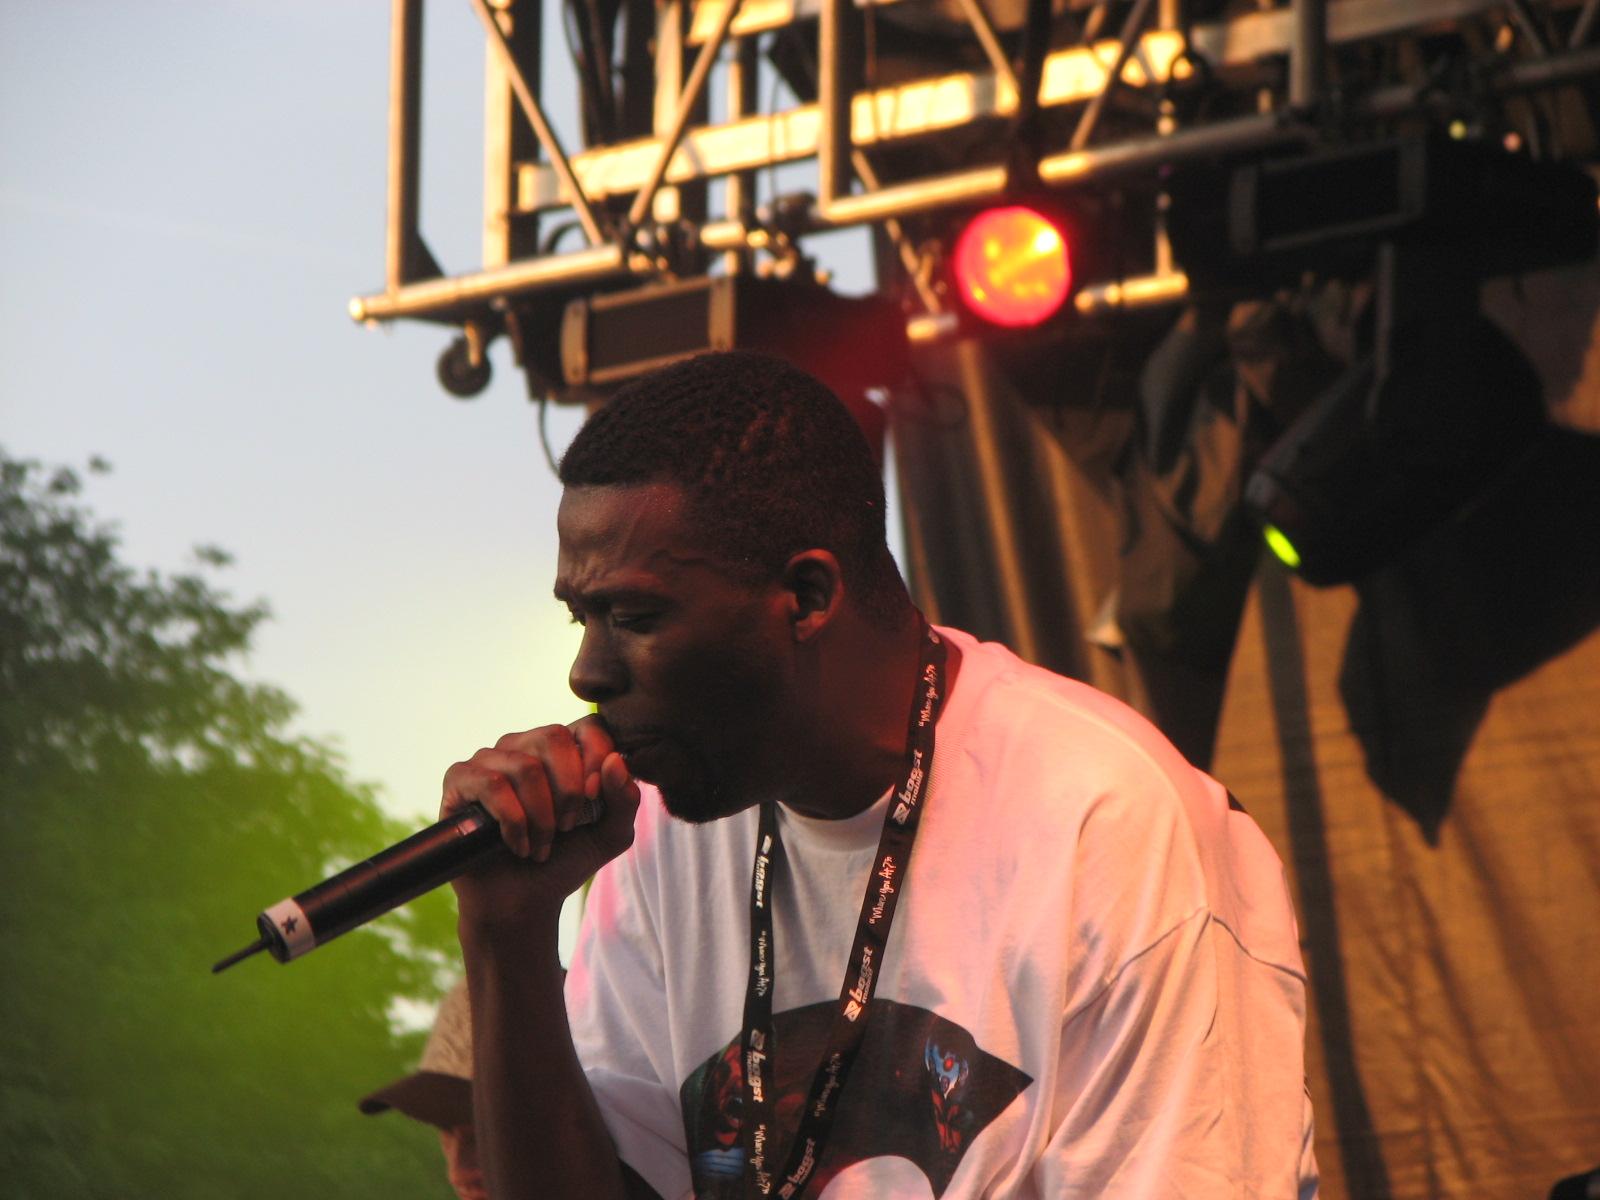 The Wu Tang Clan's GZA/The Genius performing at the 2007 Pitchfork Music Festival.